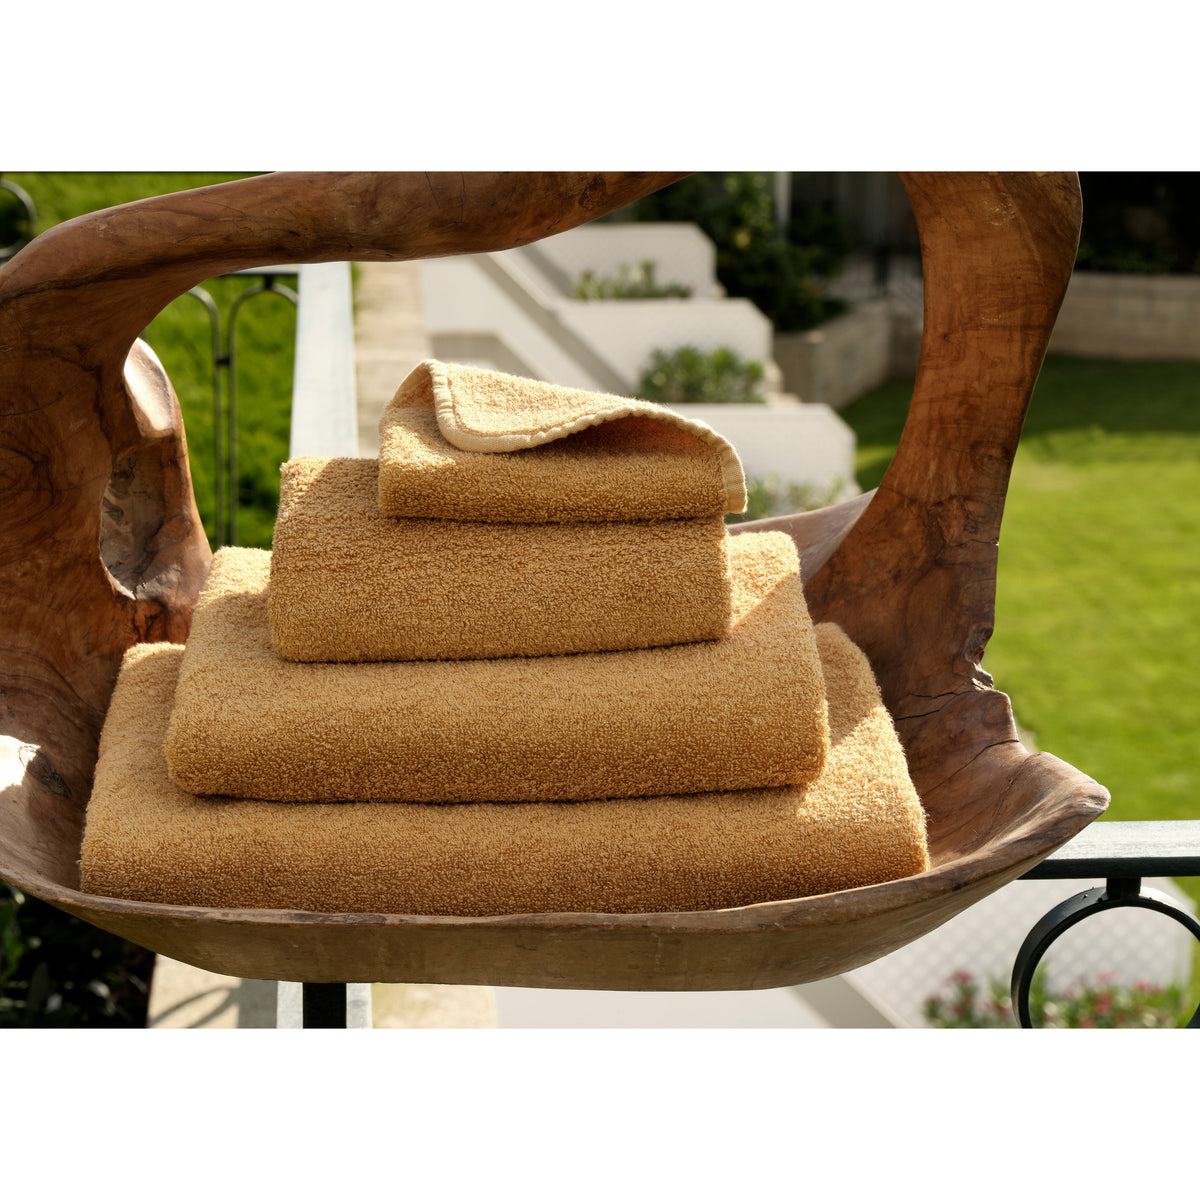 Abyss Lino Bath Towels Stack Folded Fine Linens